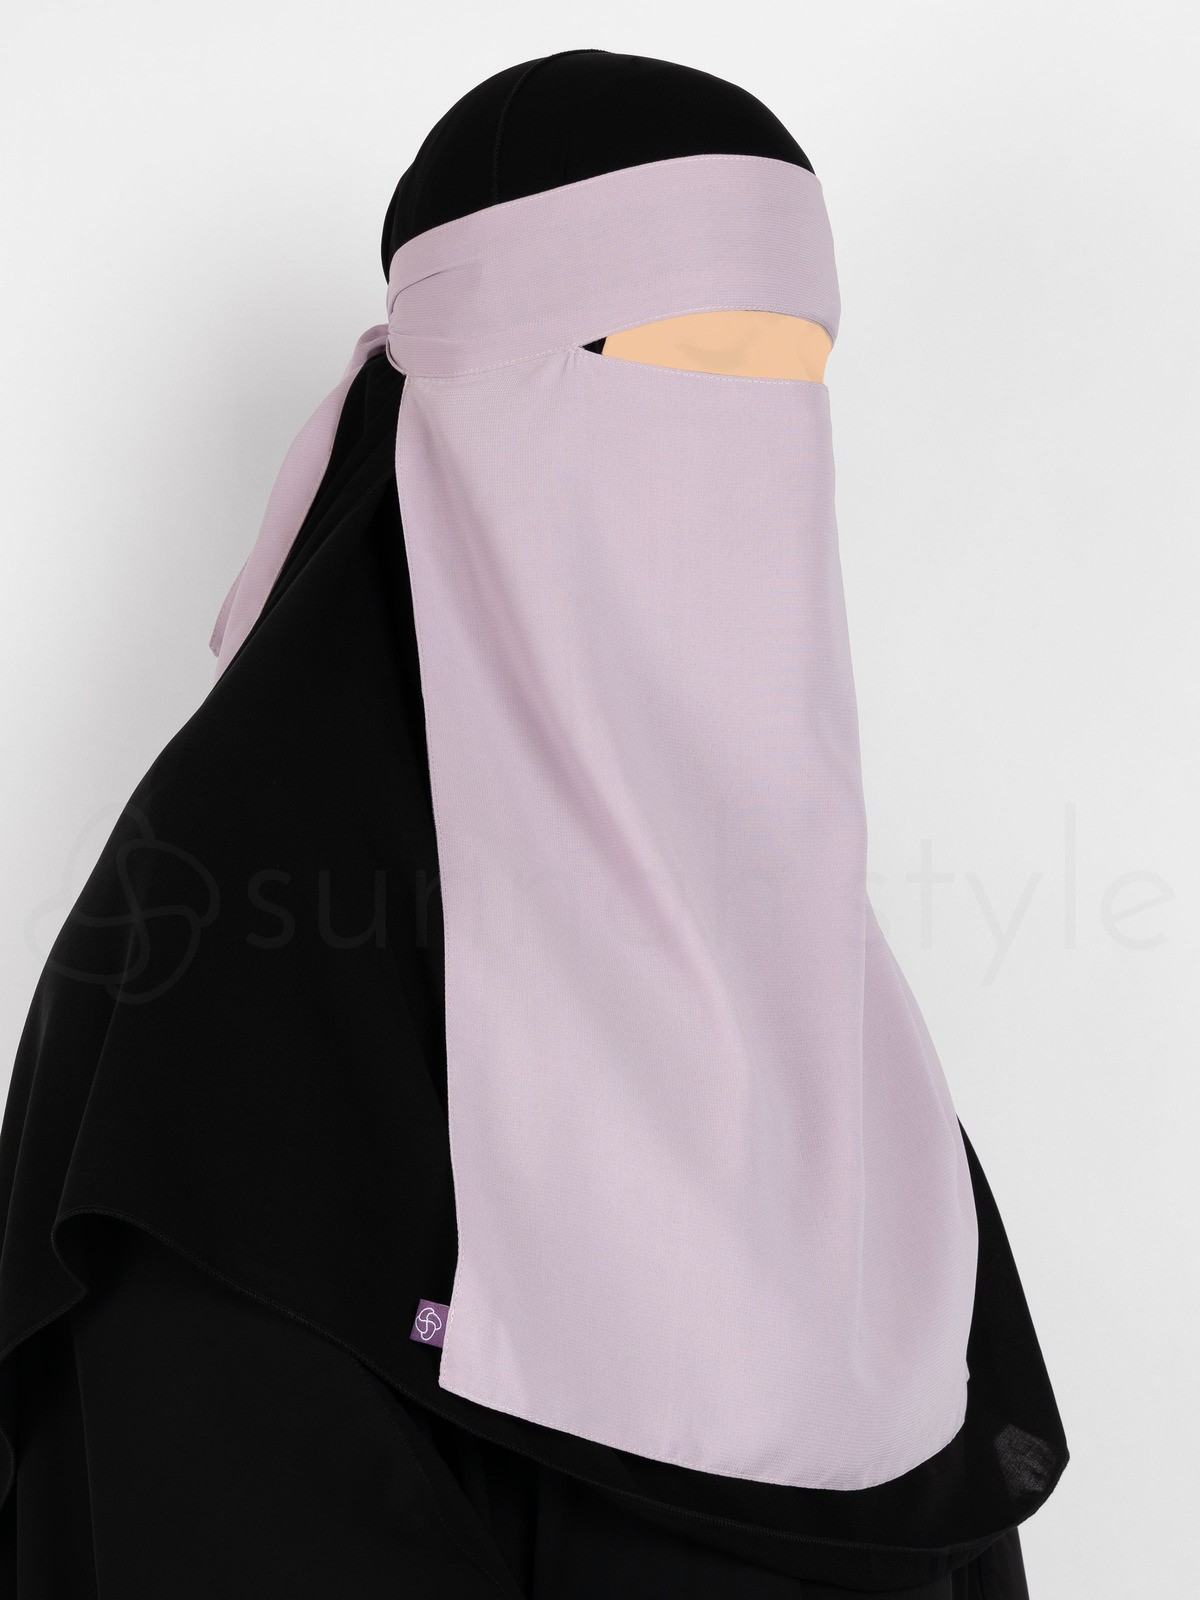 Sunnah Style - One Layer Niqab (Lavender)